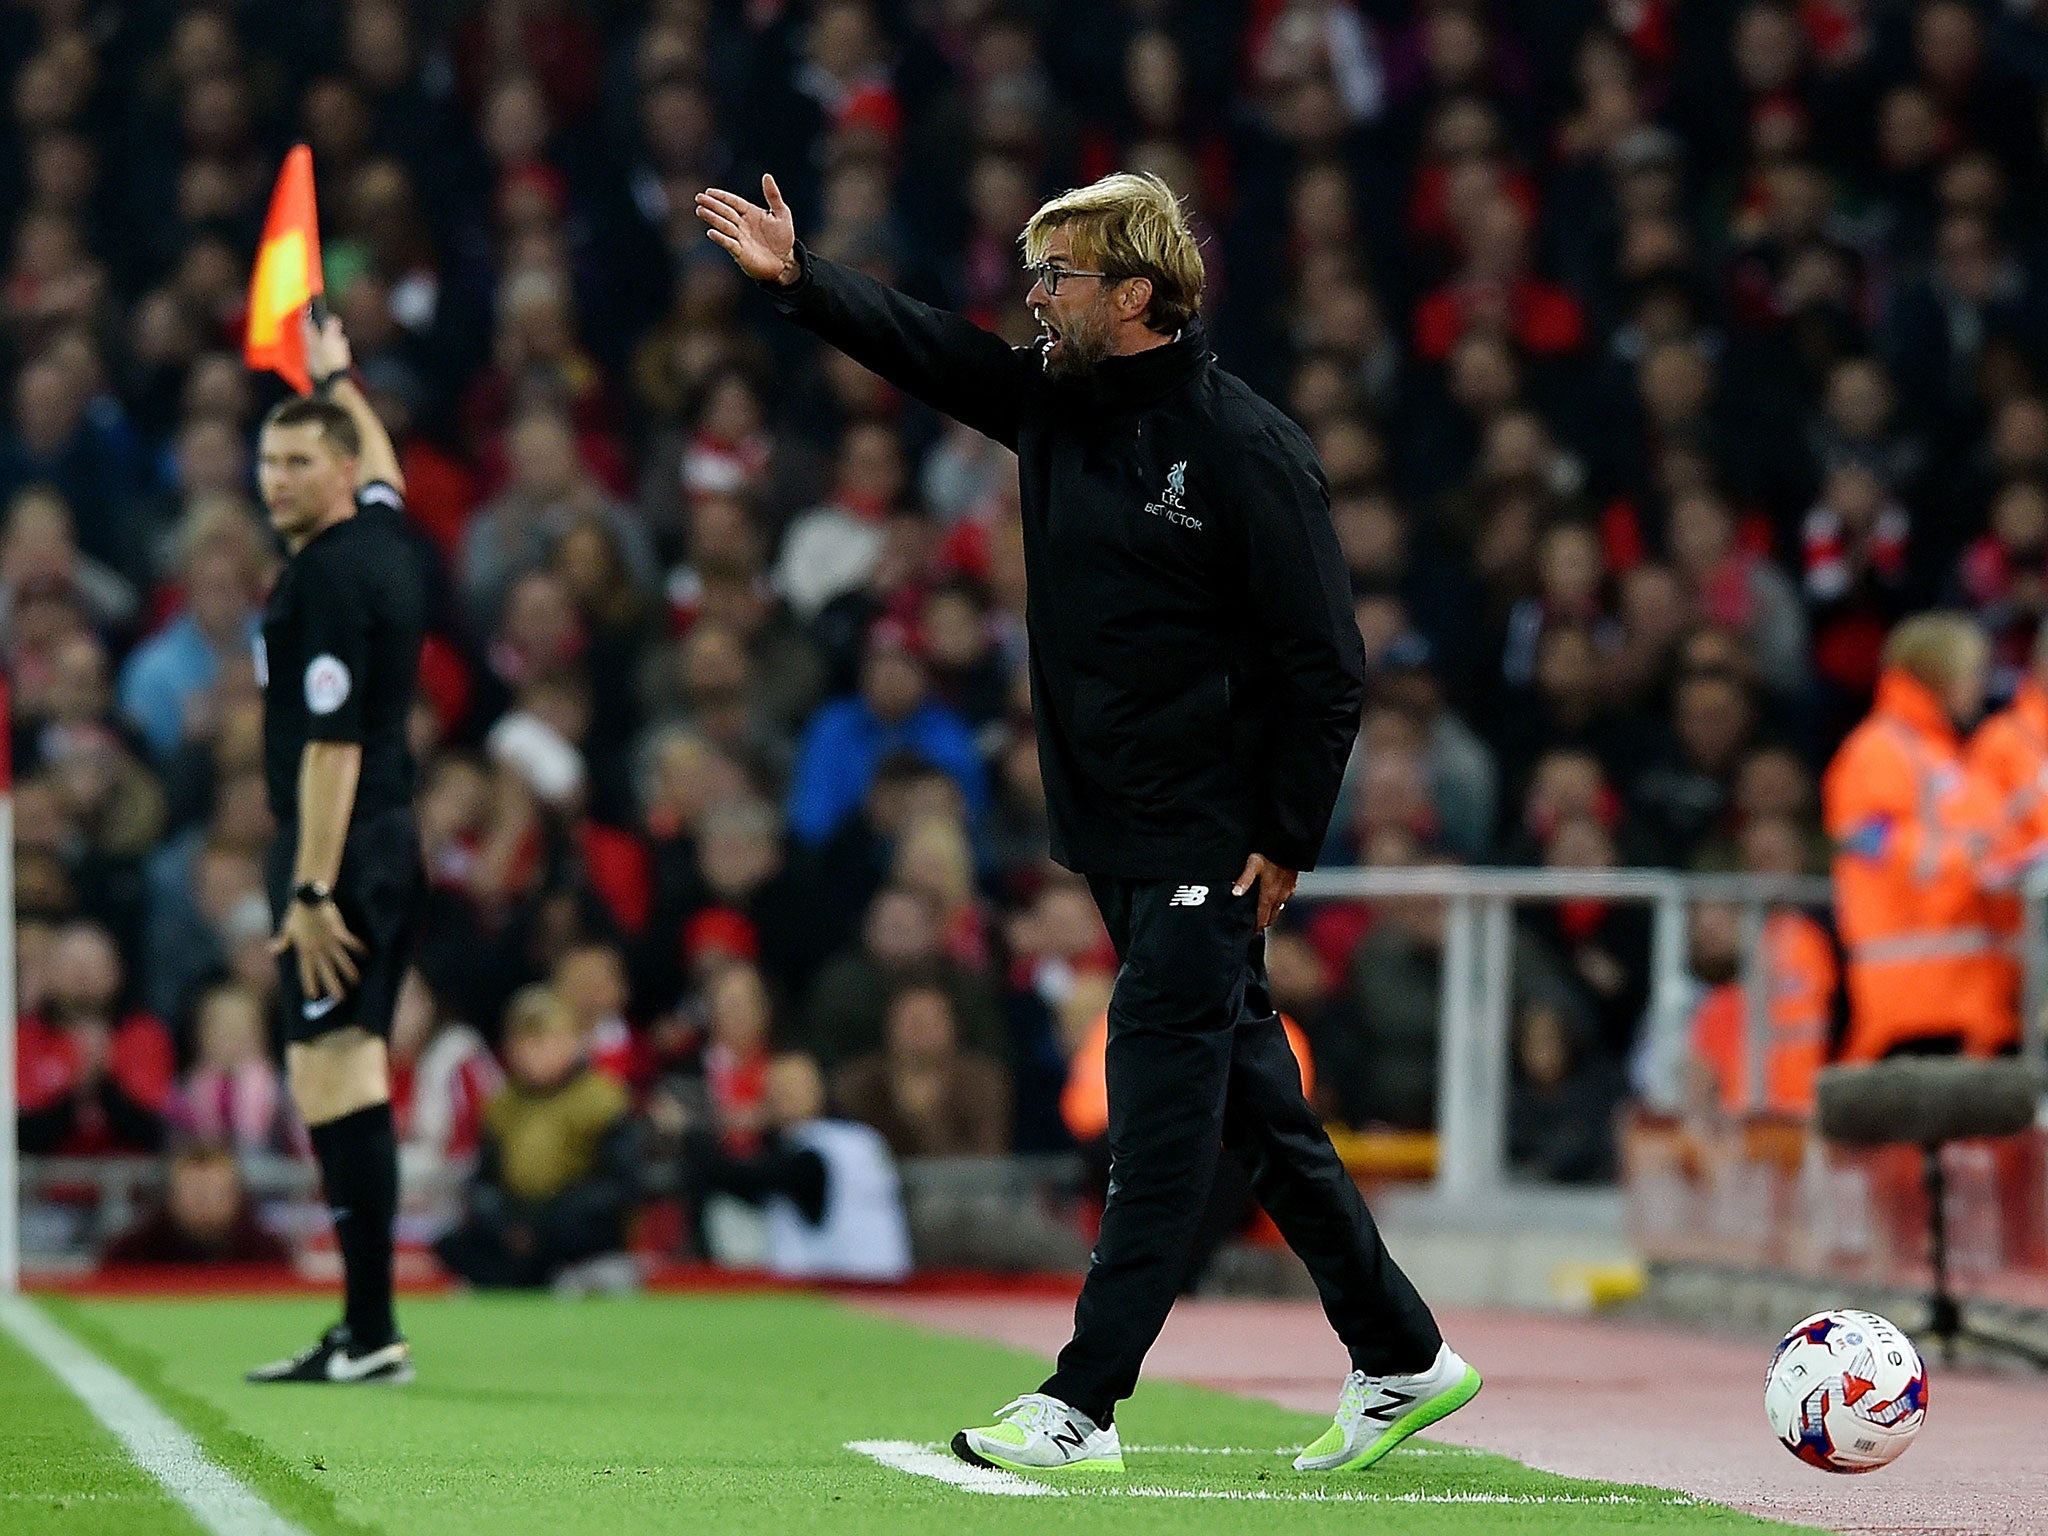 Klopp was his usual animated self